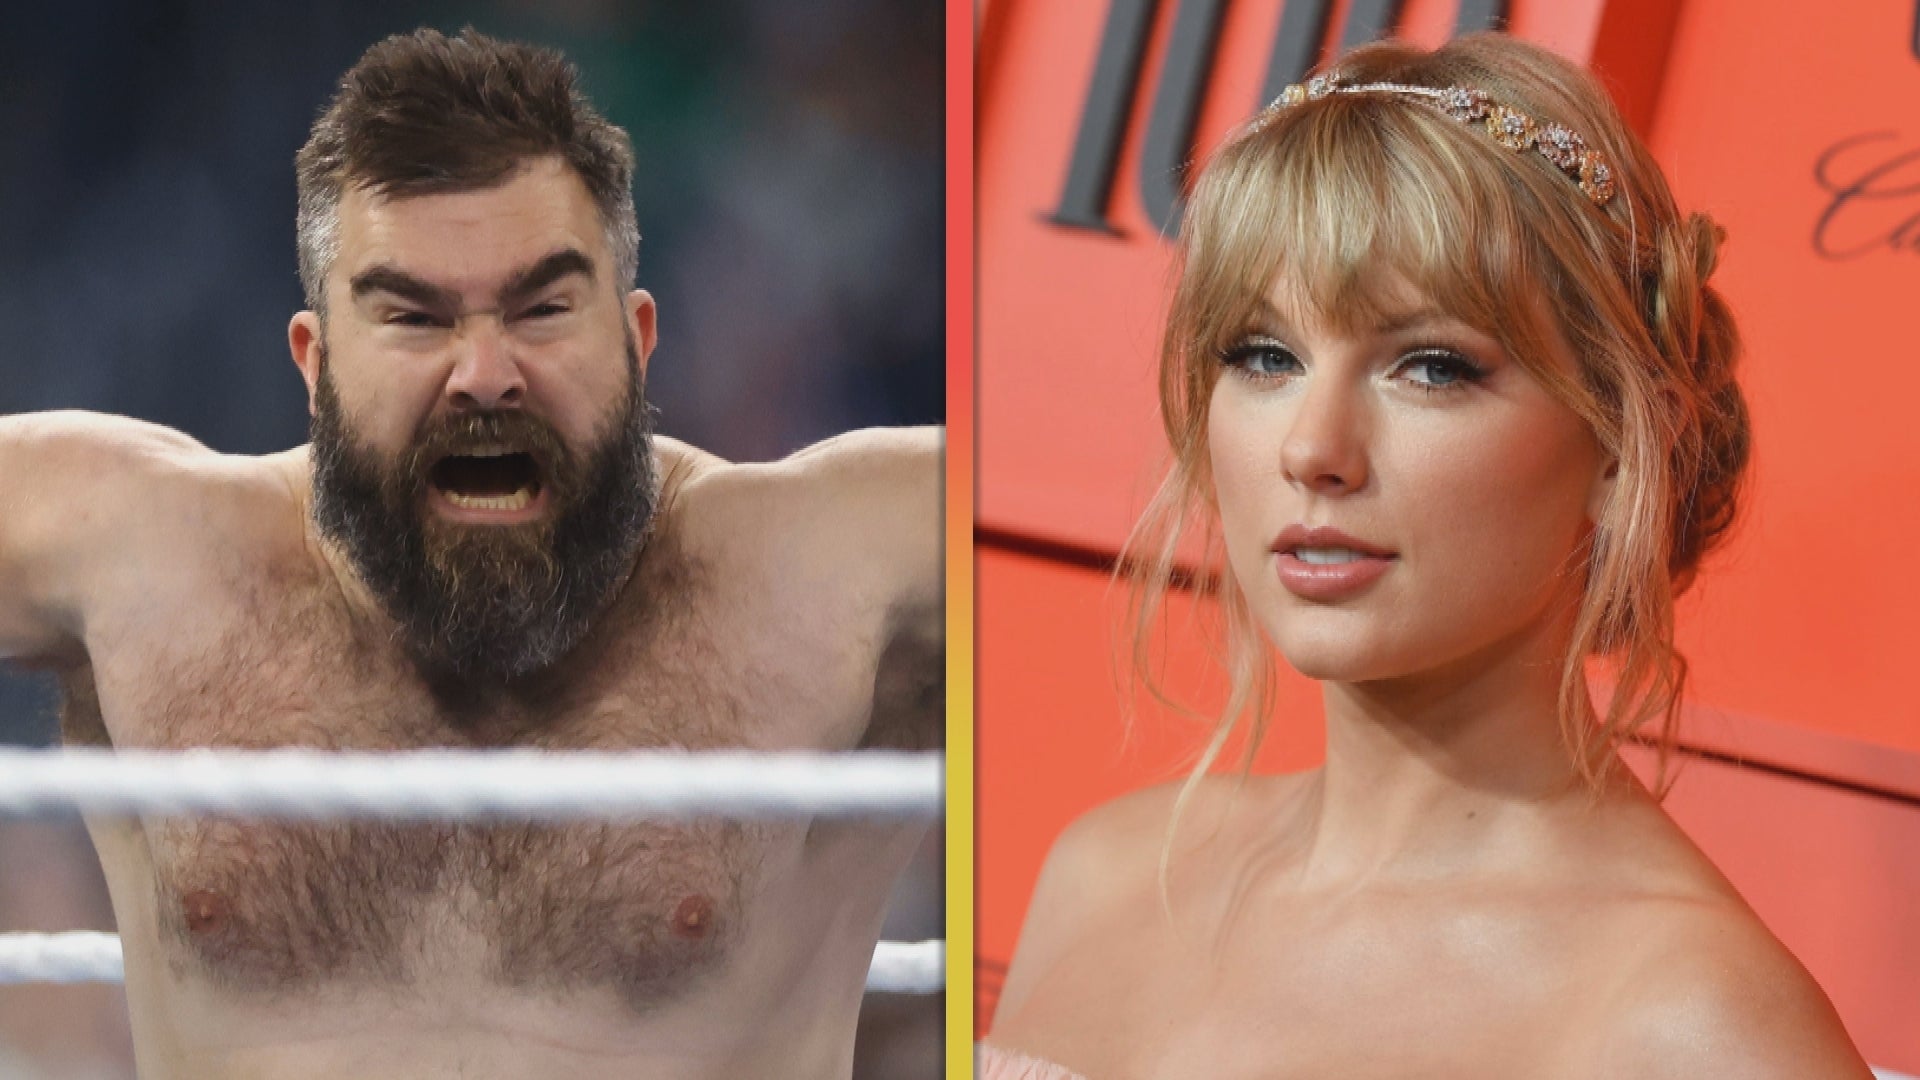 Jason Kelce Called Taylor Swift's ‘Brother-in-Law' During Surprise WWE Appearance